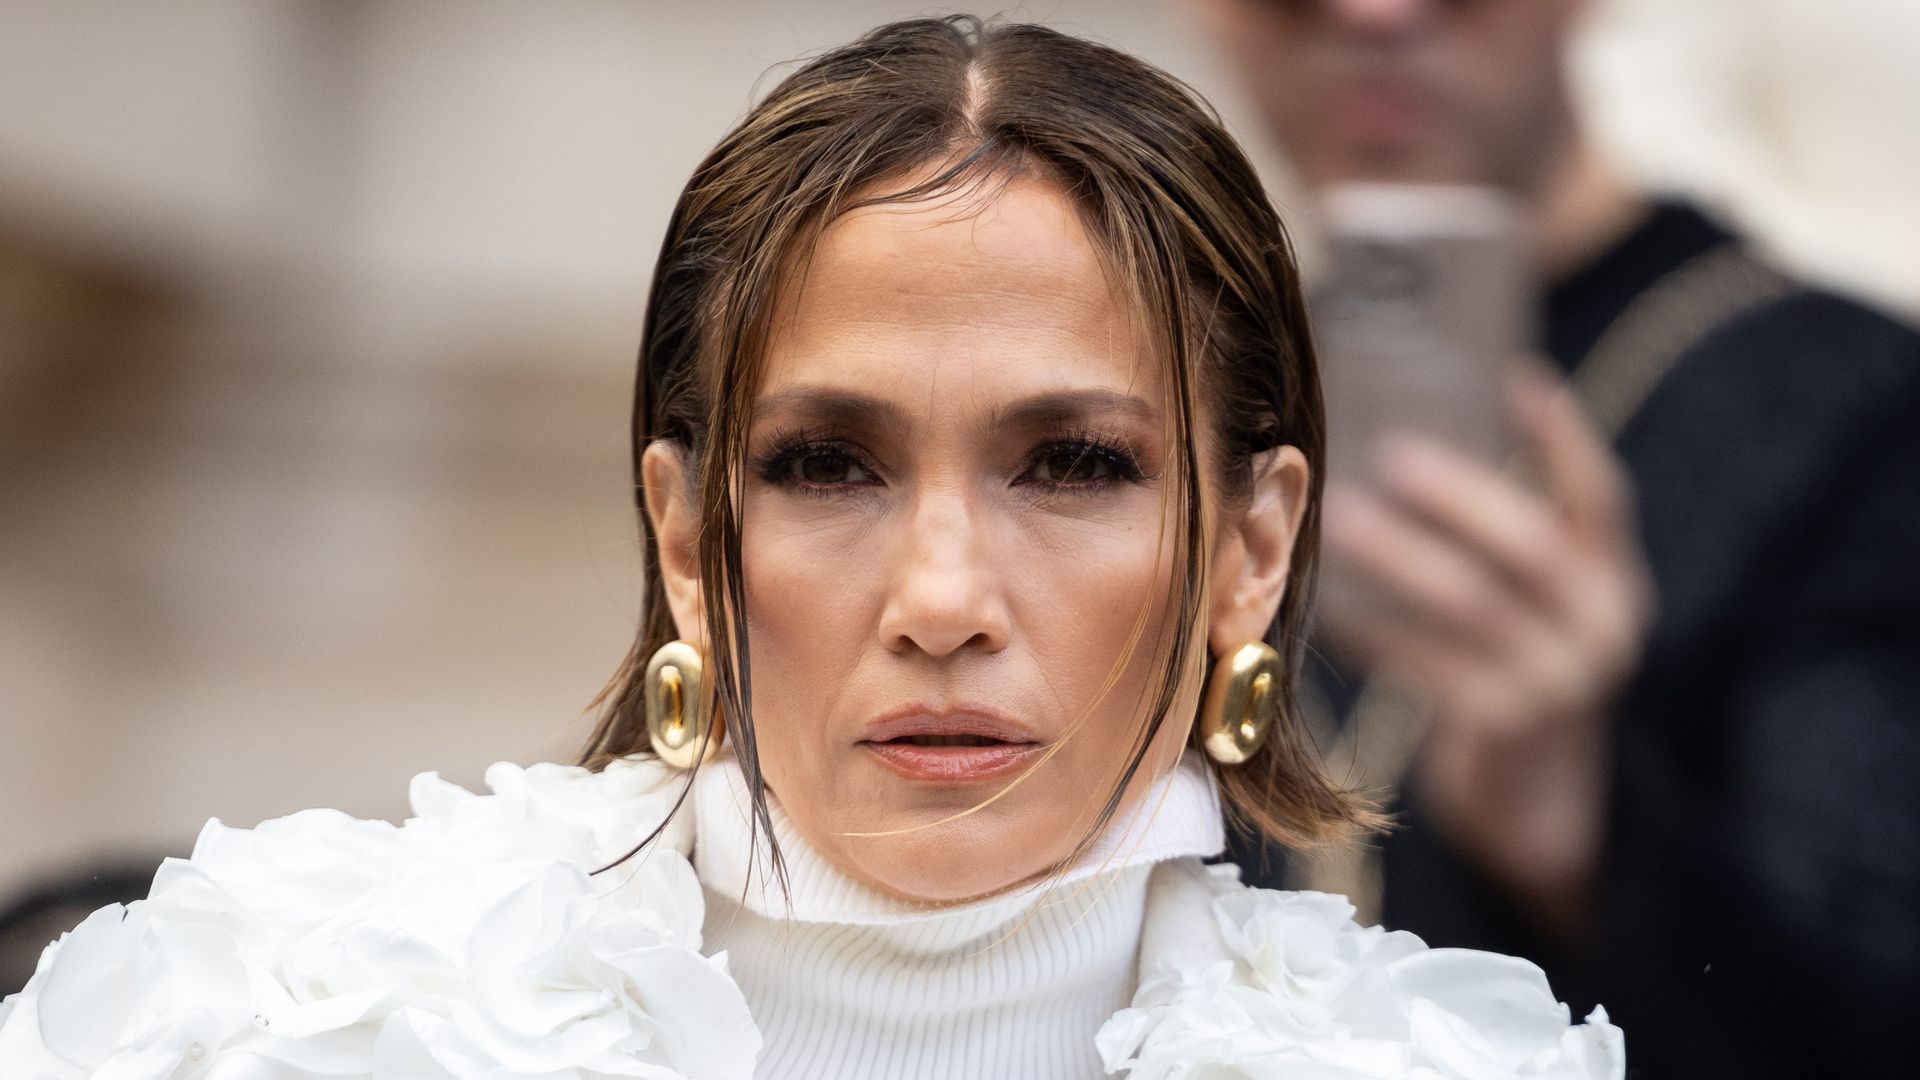 Jennifer Lopez, 54, surprises with unexpected new look and